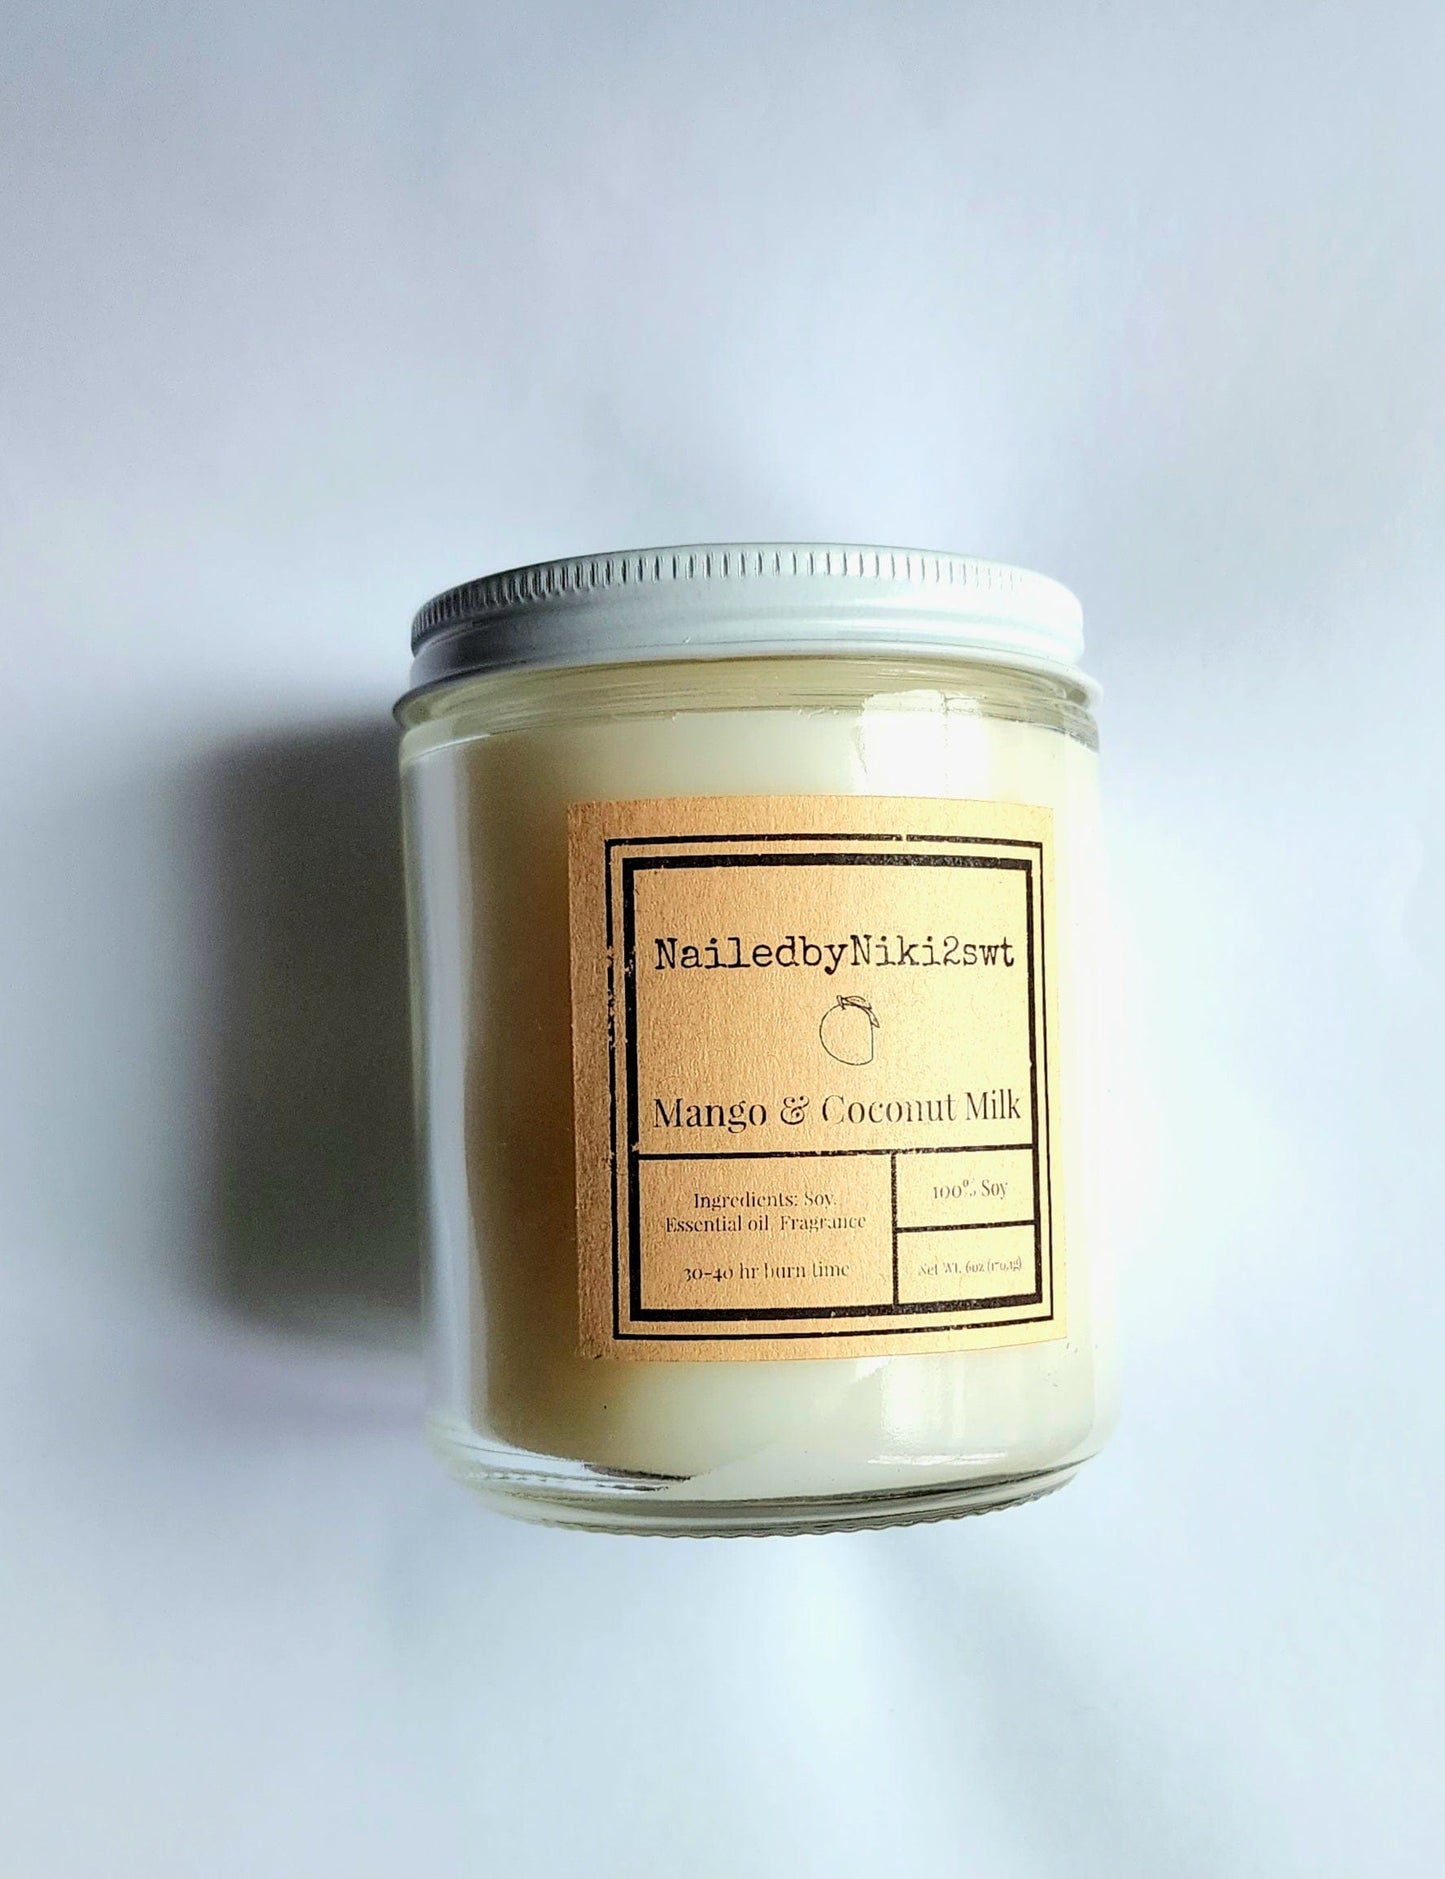 NailedByNiki2swt Bath & Body All Natural Soy Wax Candle Press on Nails Self Care Accessories